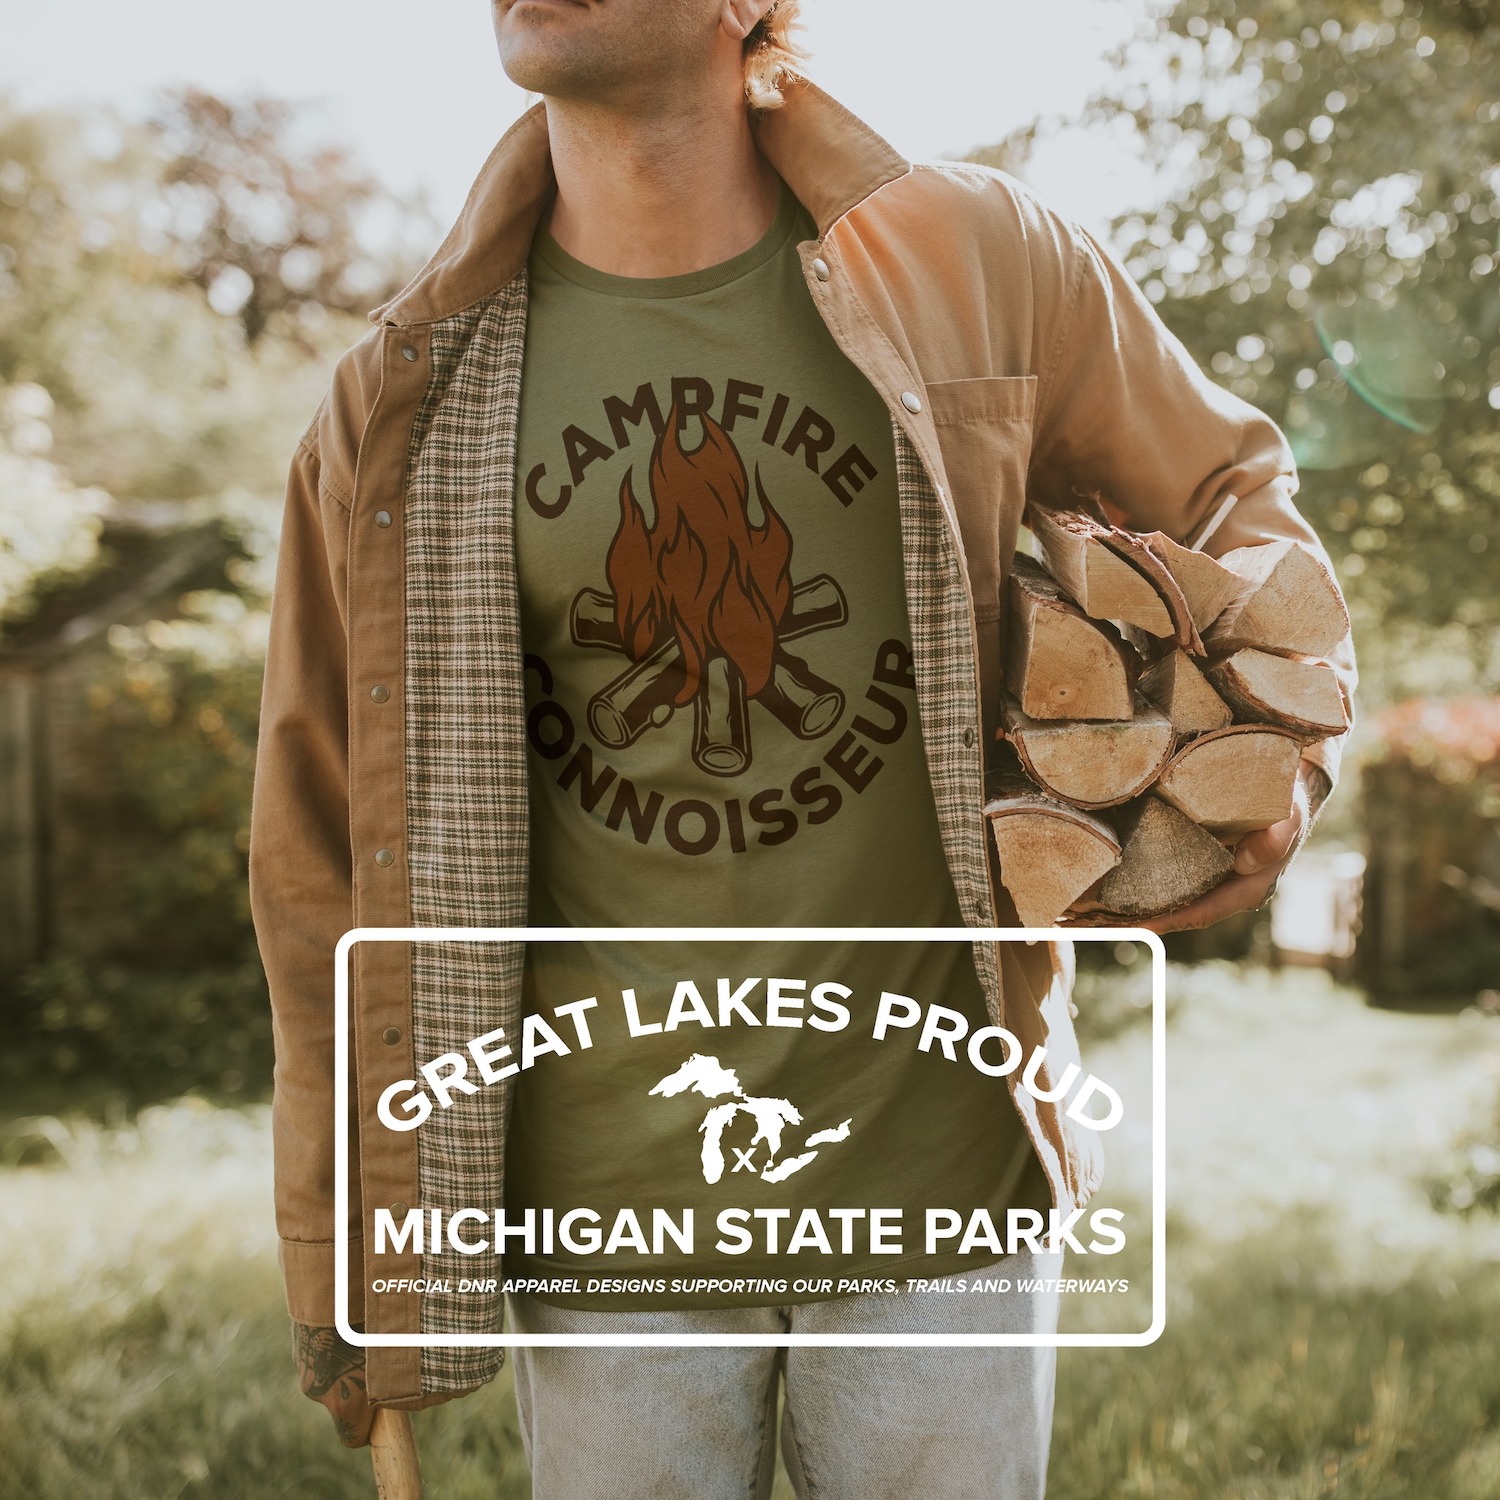 Michigan DNR Partners with Traverse City Company for New, Fun State Parks Gear